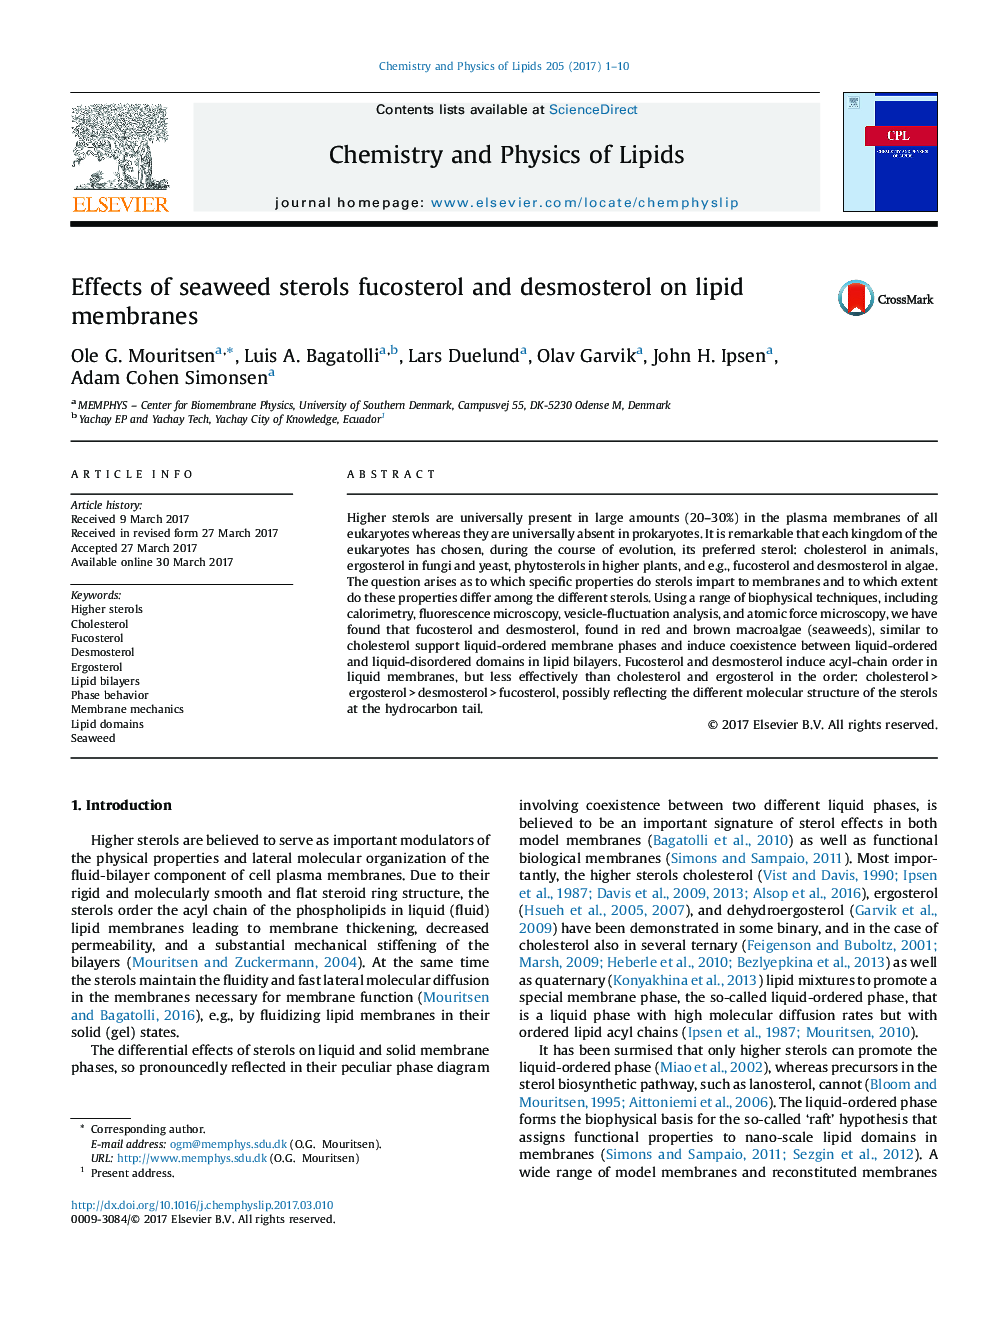 Effects of seaweed sterols fucosterol and desmosterol on lipid membranes